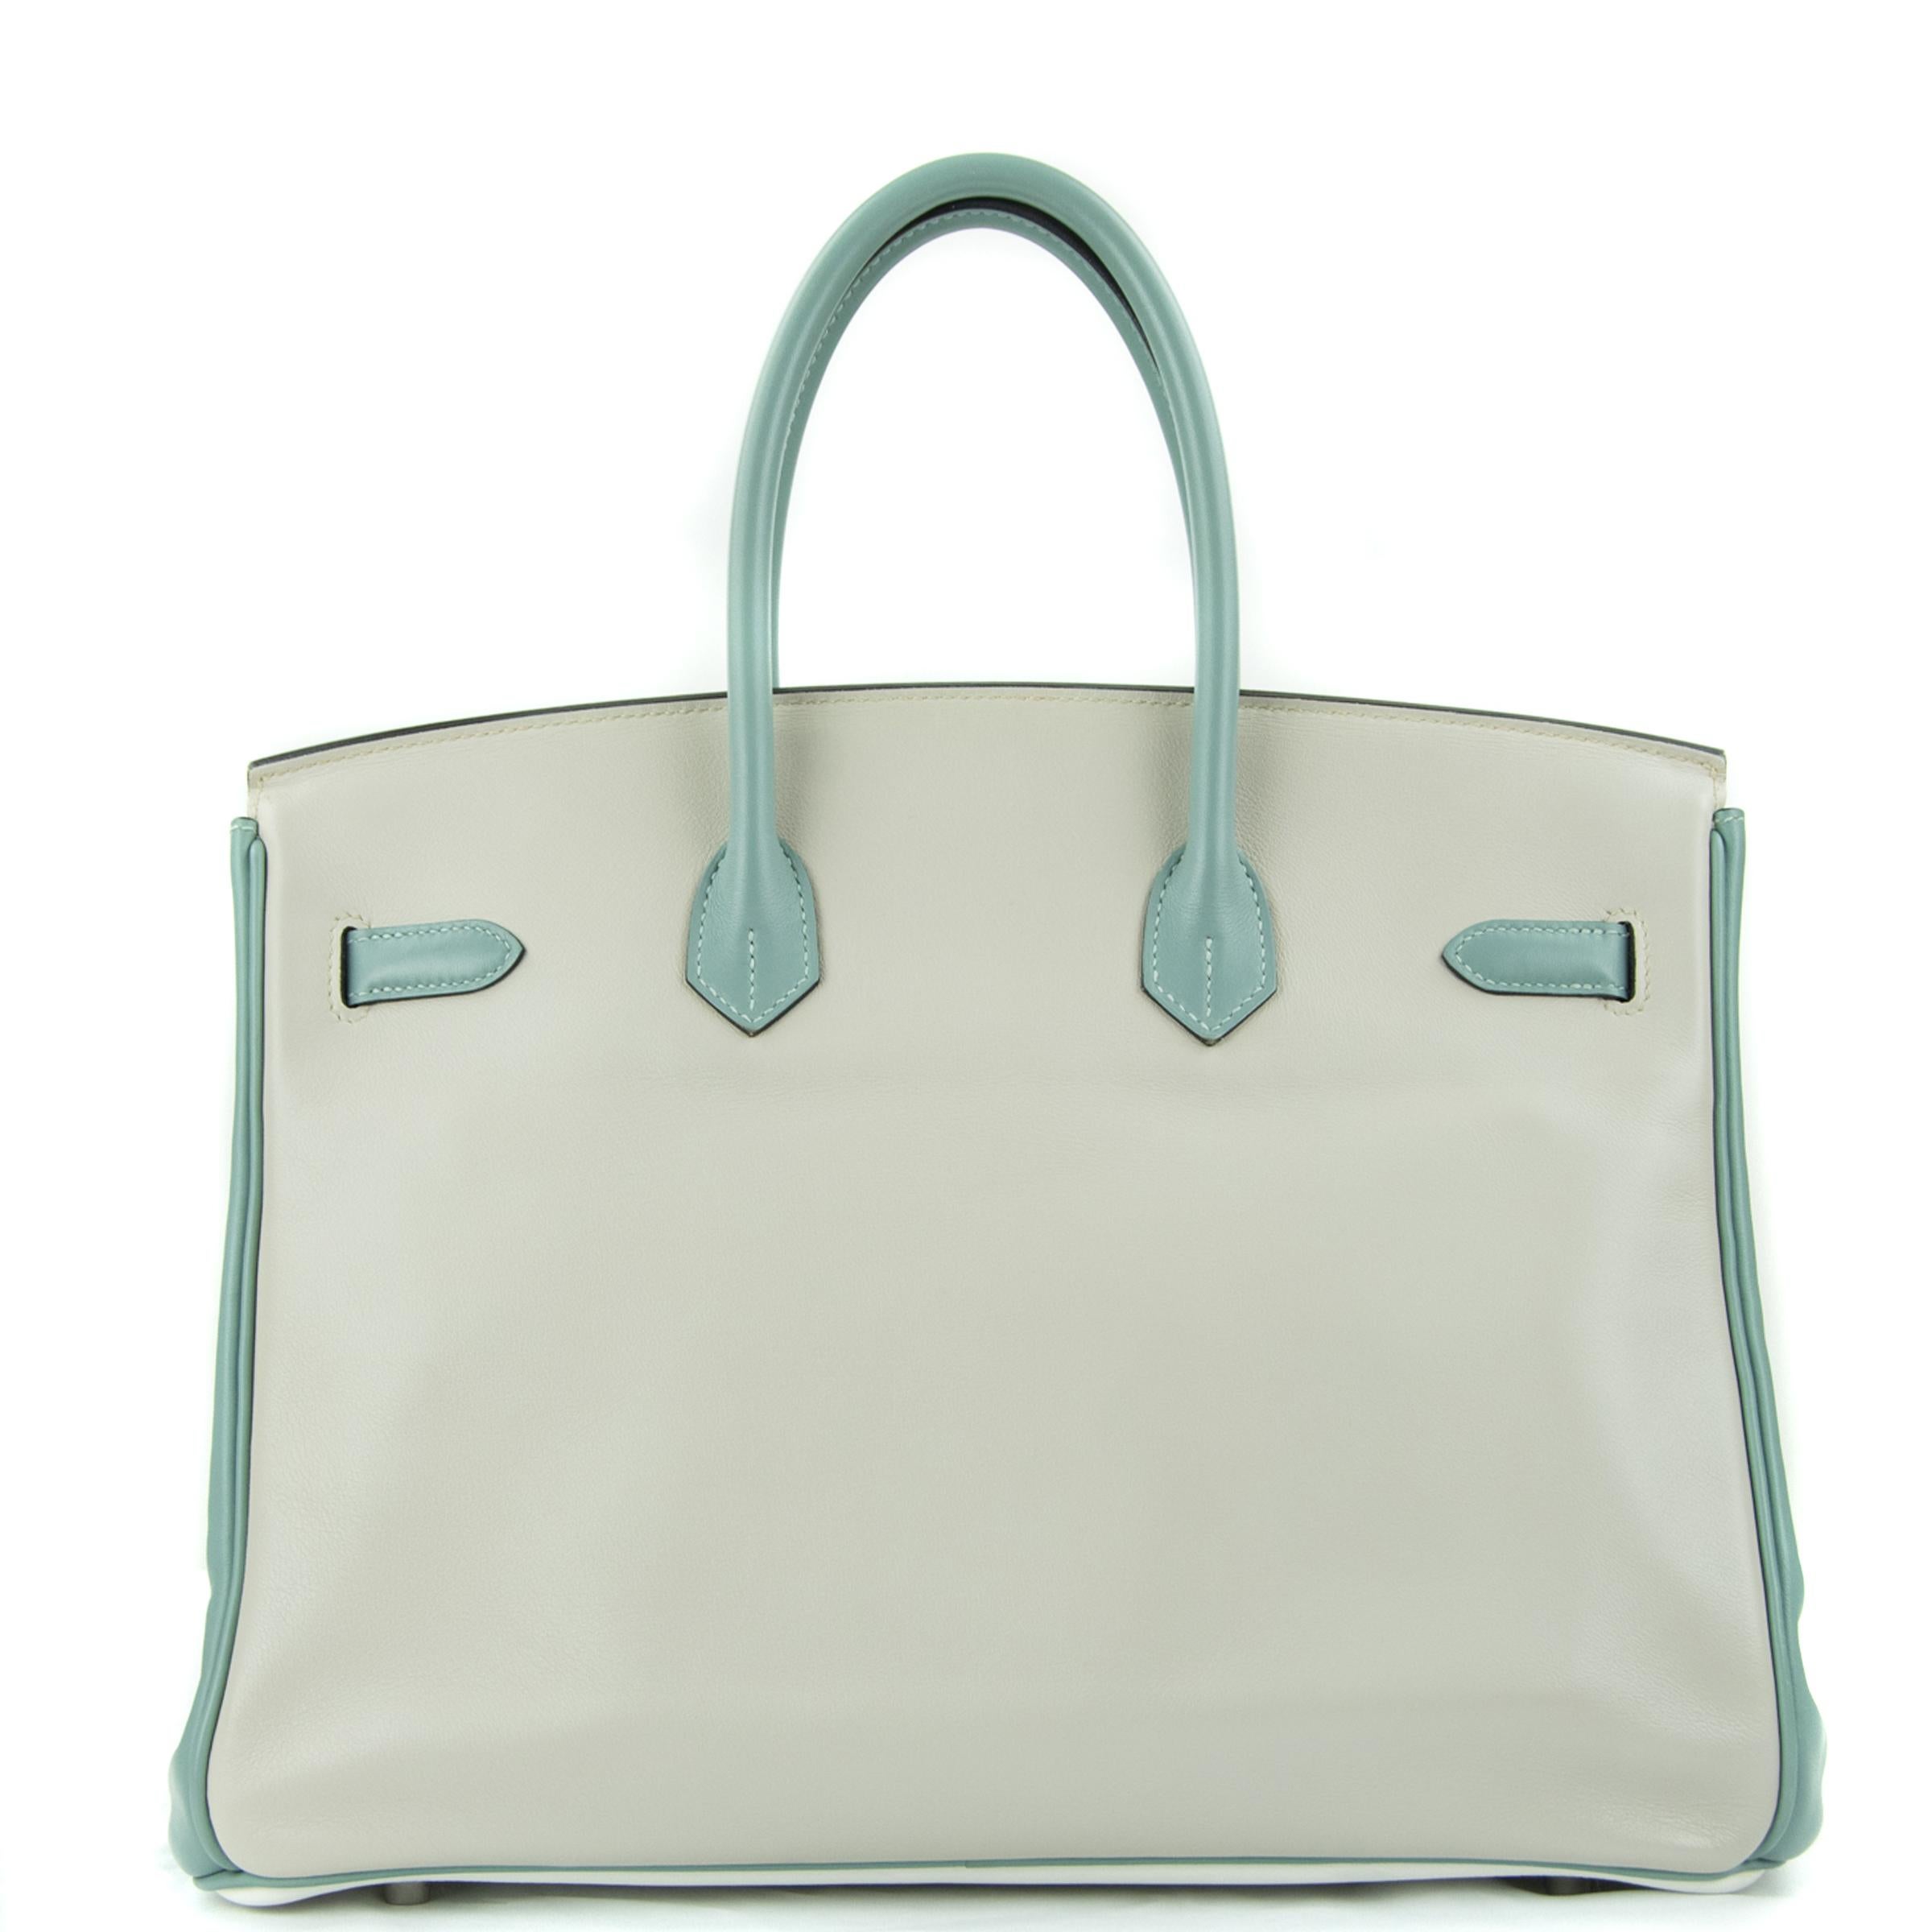 Hermes 35cm Birkin HSS Tri Color bag. This iconic special order Hermes Birkin bag is timeless and chic, in white, blue and craie. Fresh and crisp with brushed palladium hardware.

    Condition: Excellent, Previously Used
    Made in France
    Bag